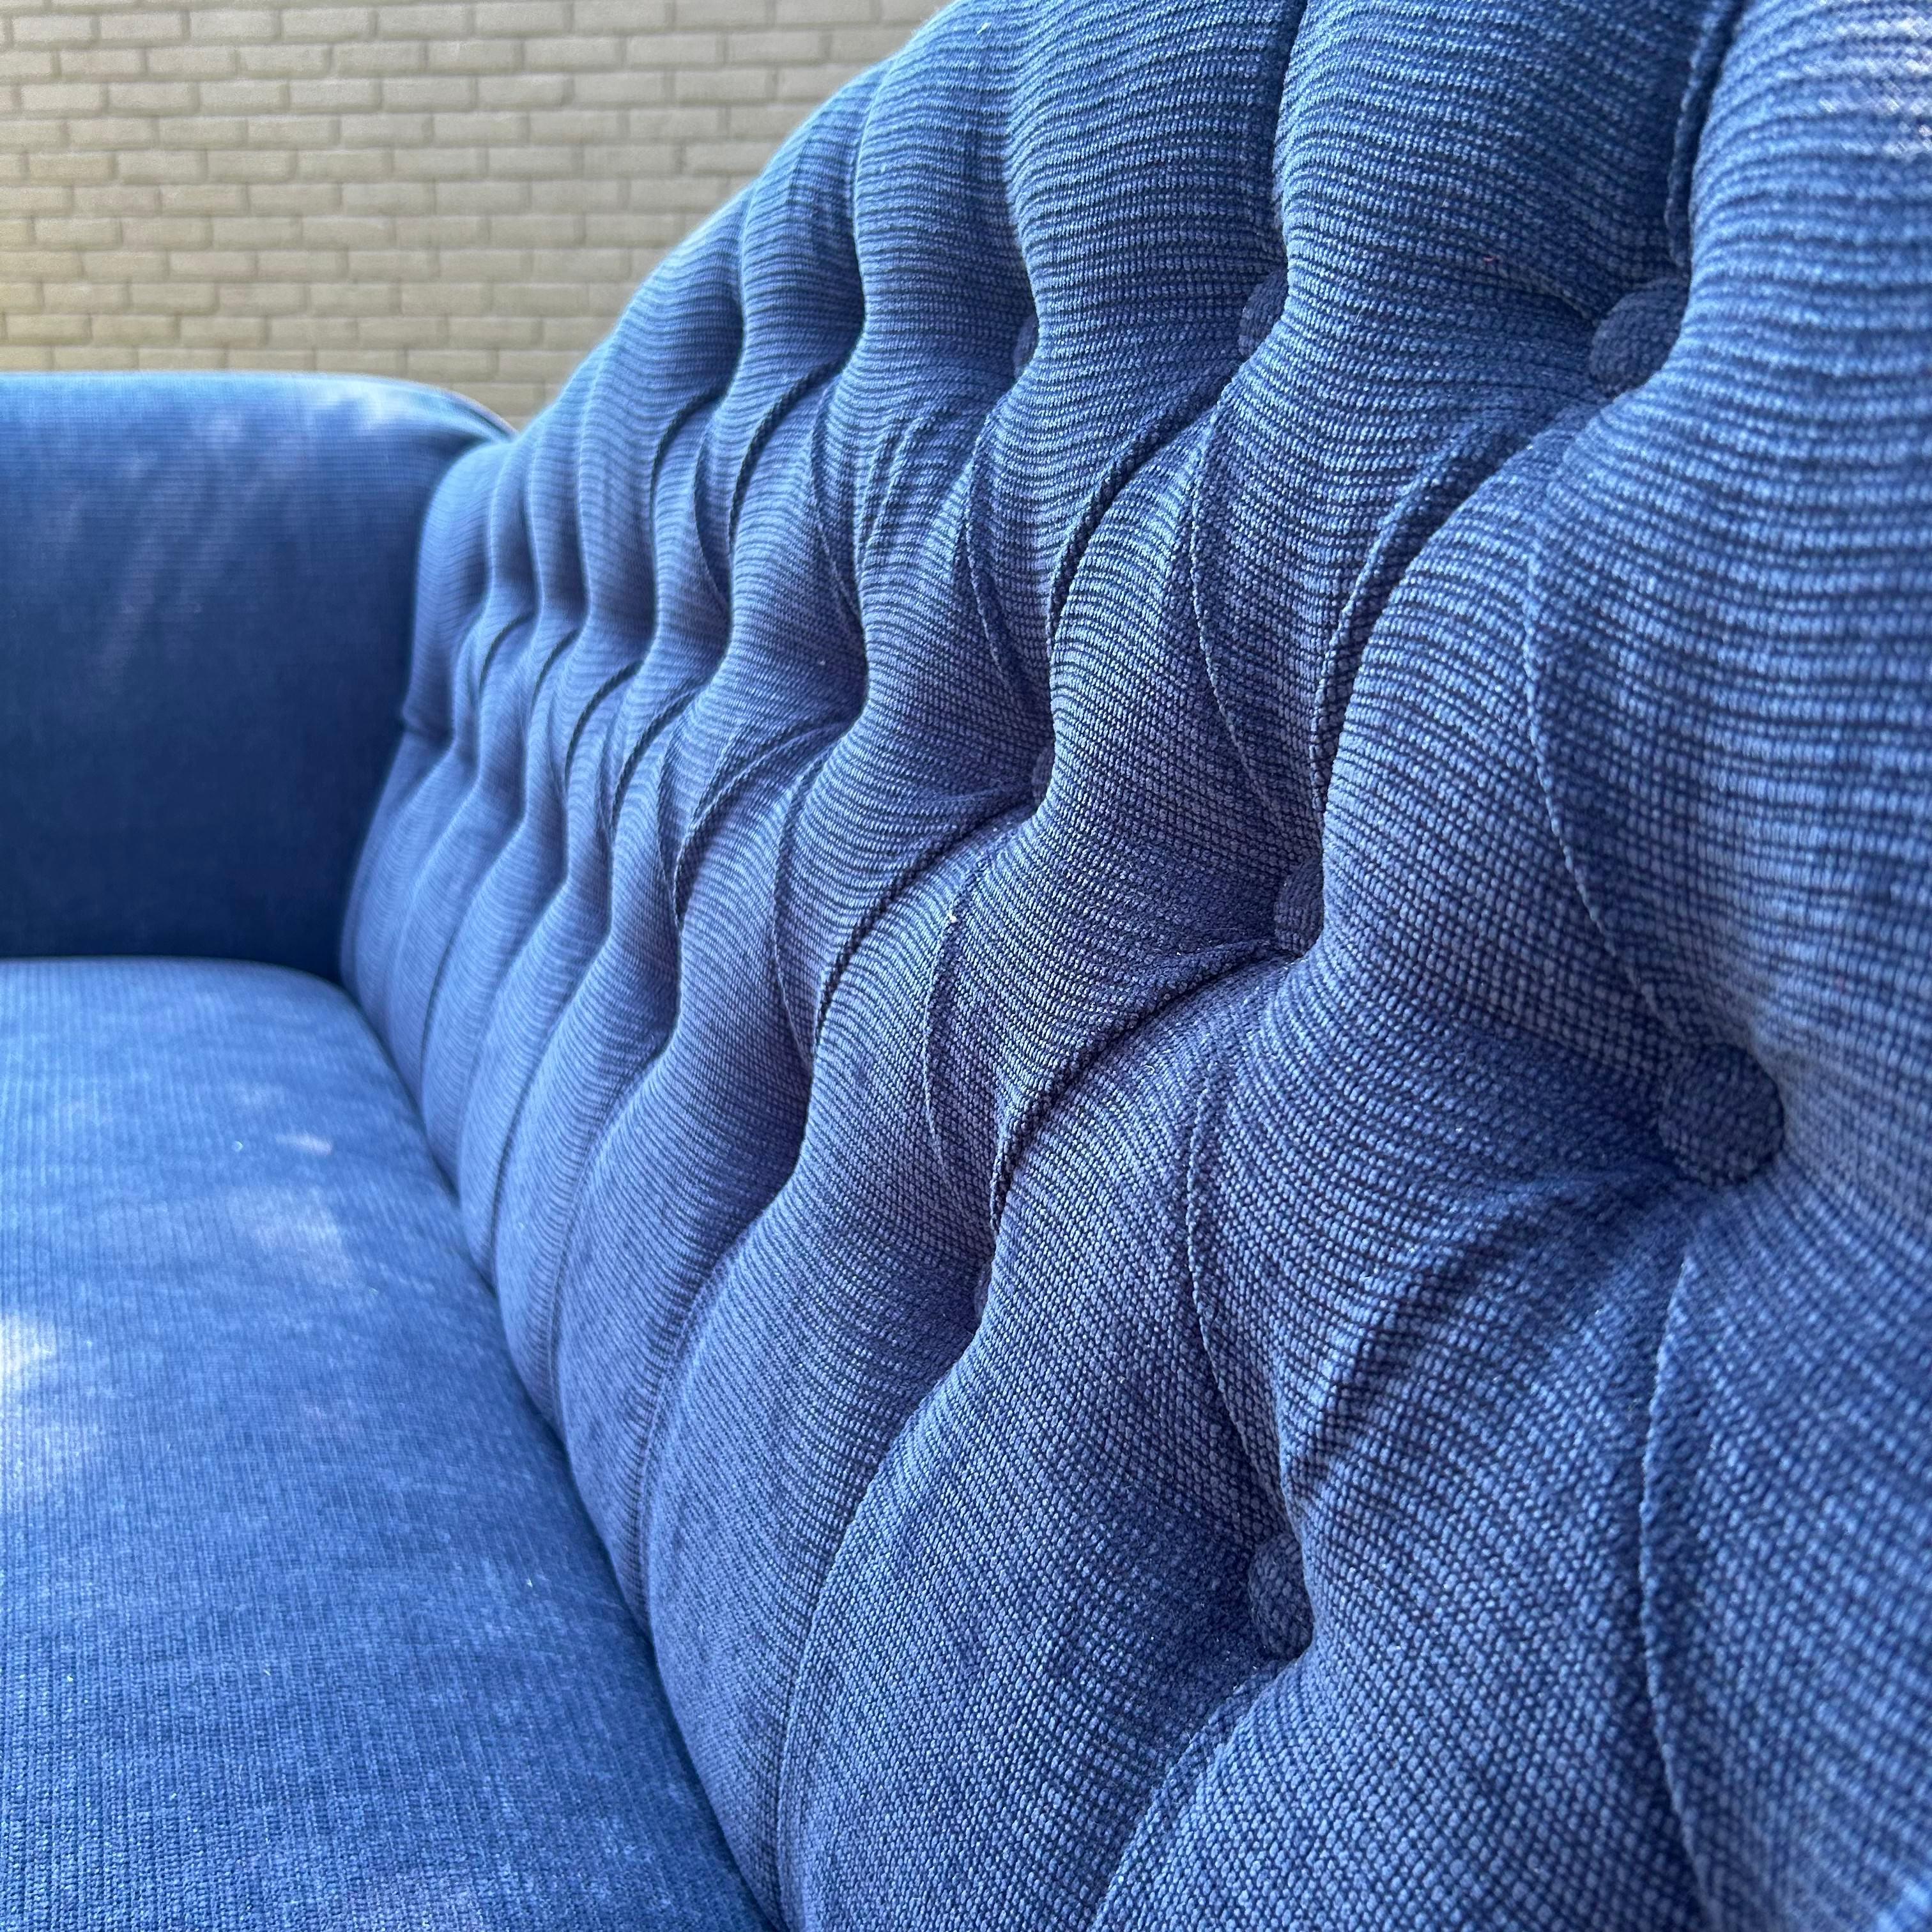 Blue on blue on blue, this vintage sofa is looking for a new place to call home. Textured corduroy in a classic navy covers the deep seat, extravagant arms, and diamond tufted back. We love the watercolor effect of the complementary fabric by Marcus